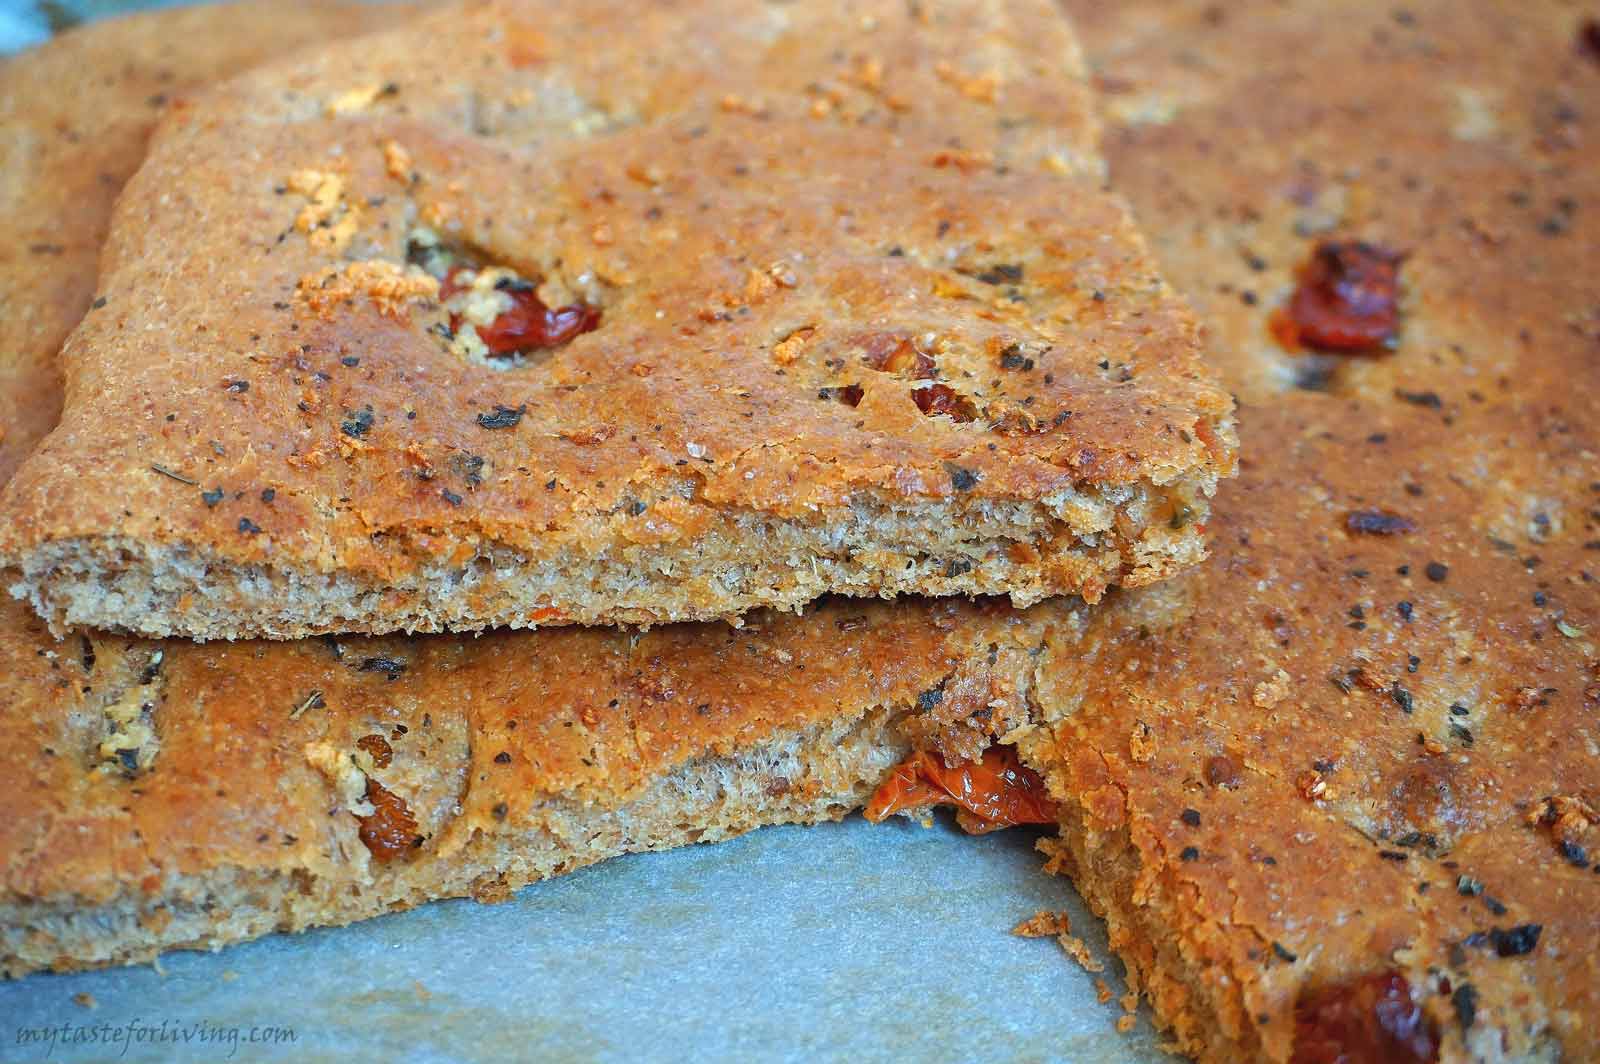 Delicious and appetizing whole wheat focaccia with sun dried tomatoes in olive oil, basil and garlic.